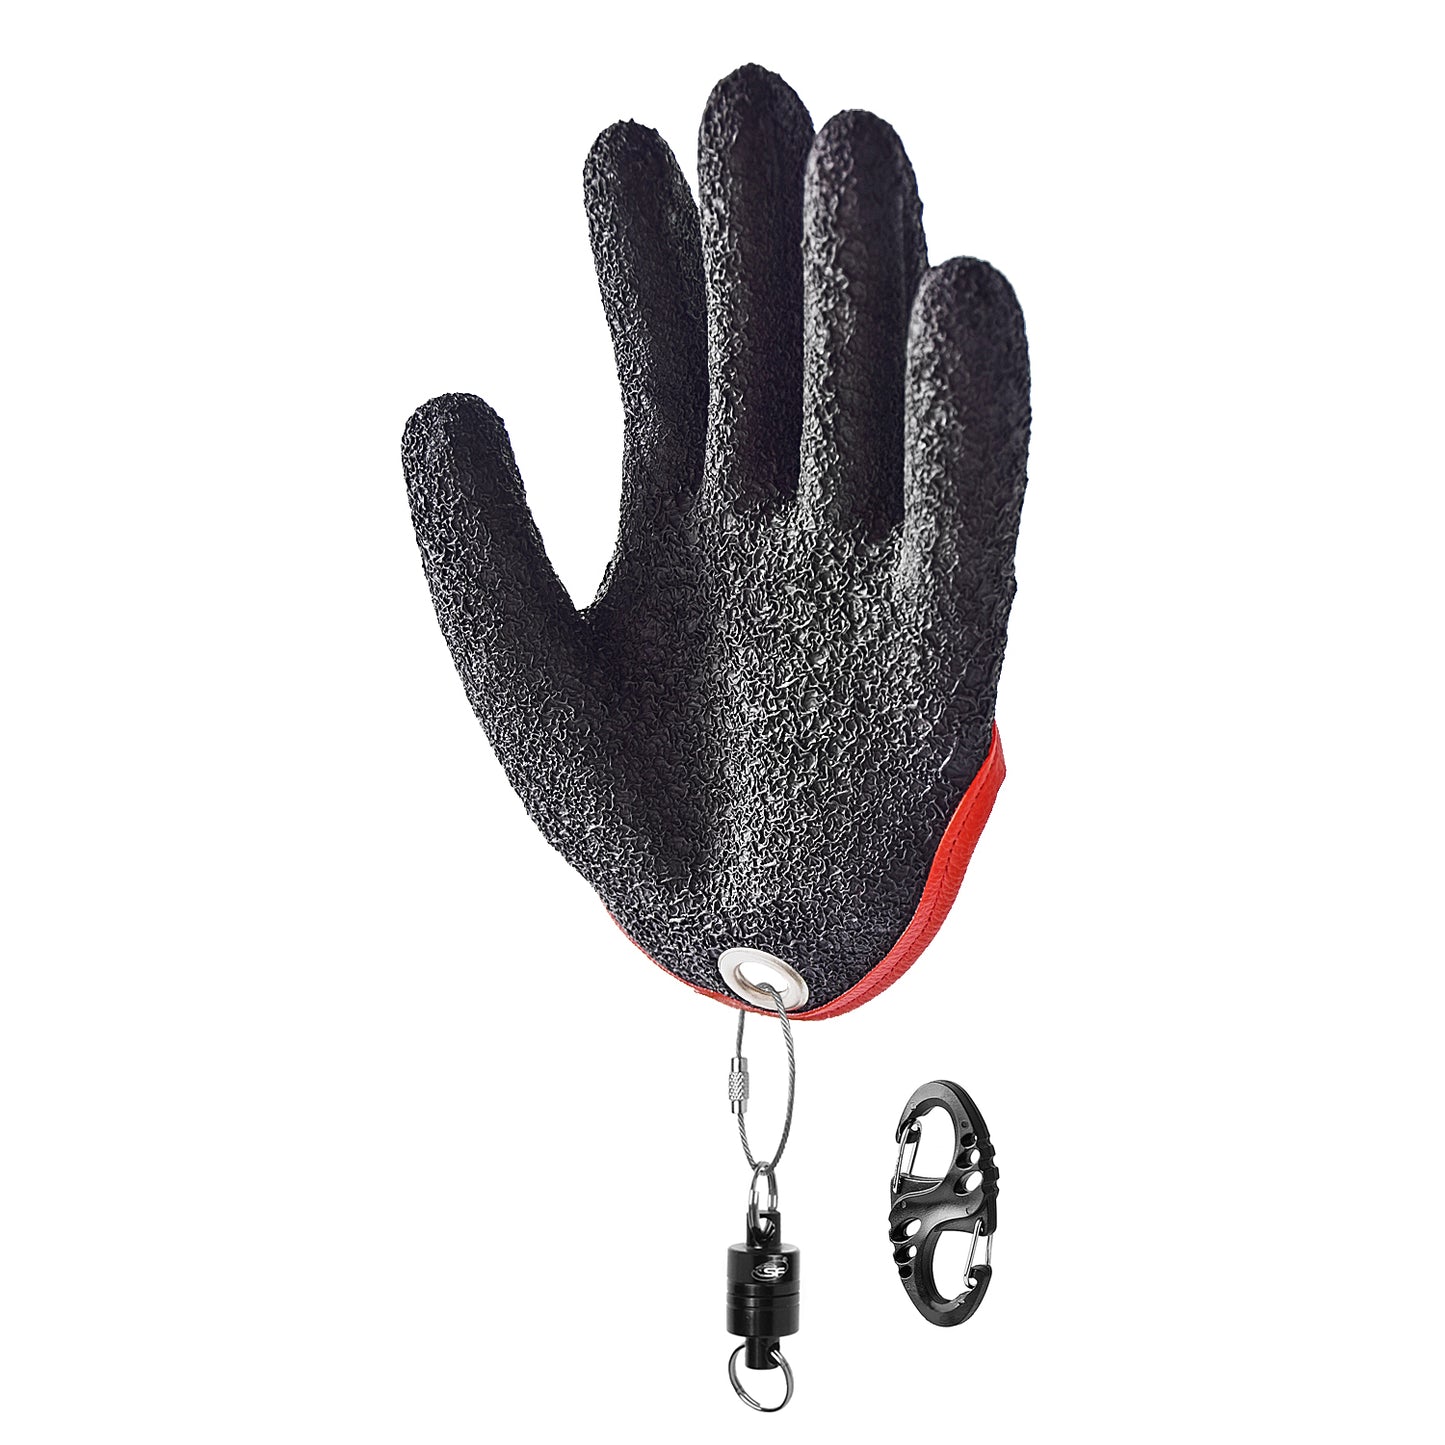 SF Fly Fishing Puncture Proof Gloves with a Magnet Release